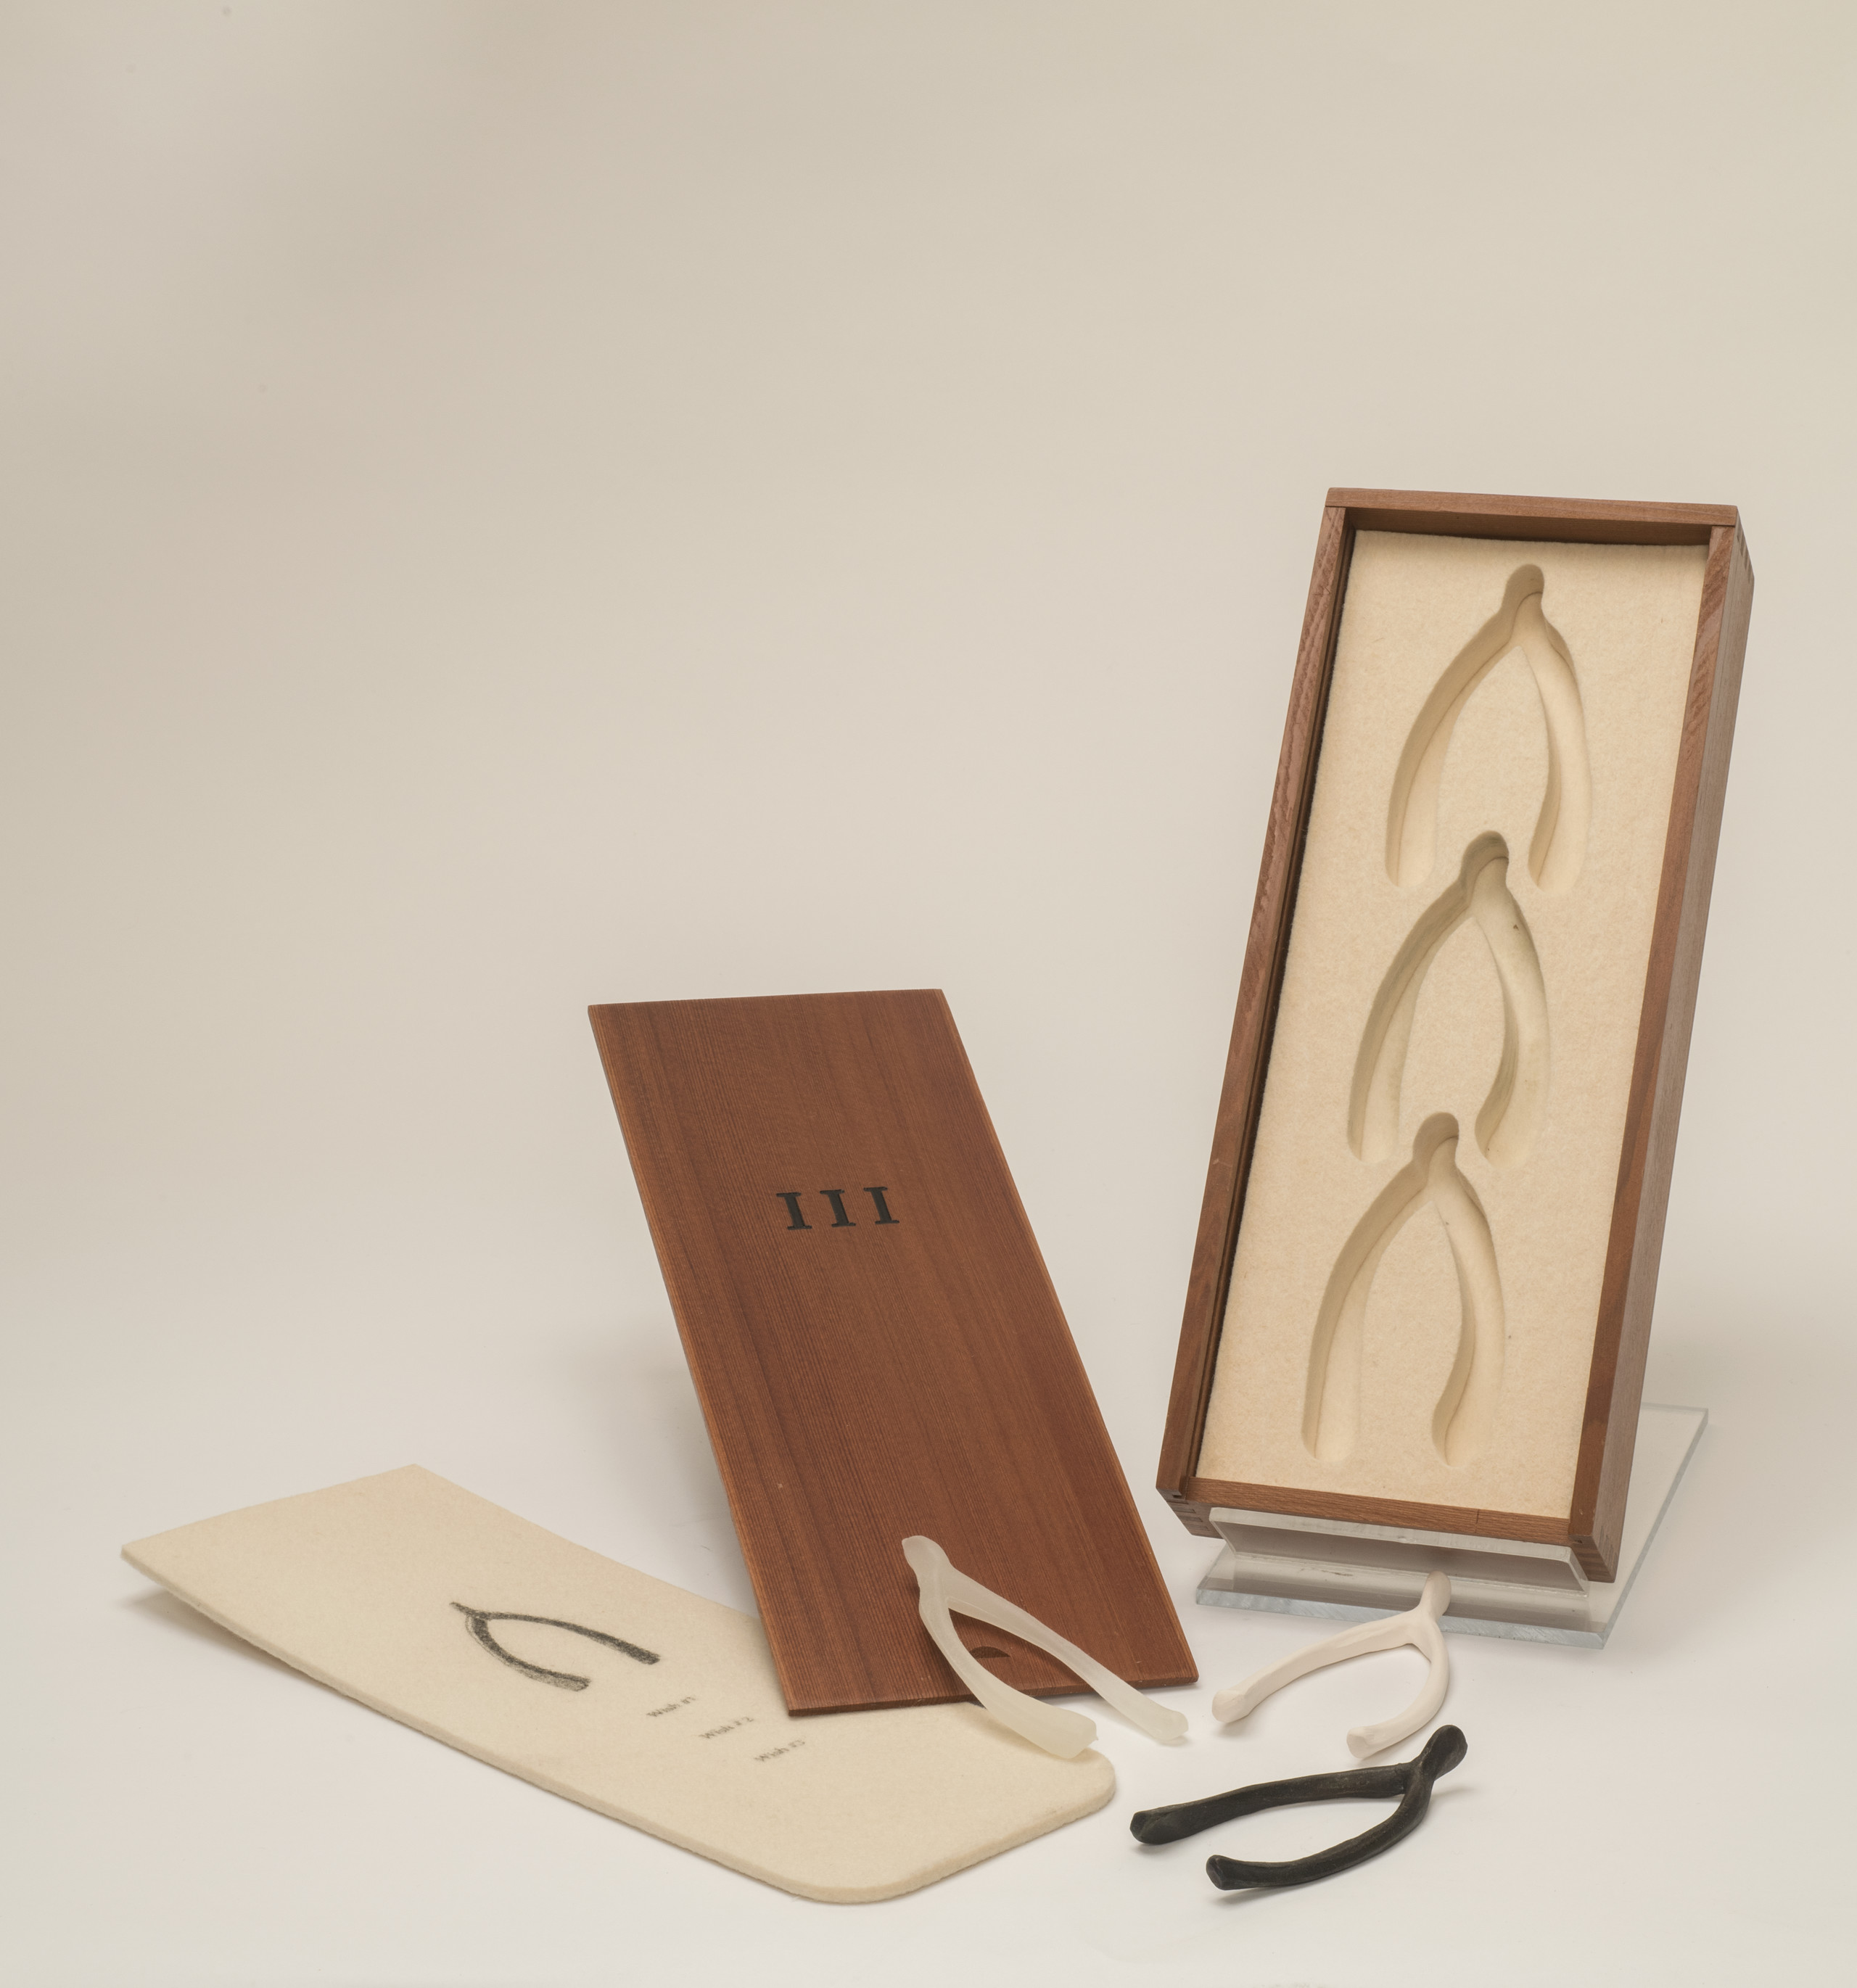 A box with indentations for three wishbones is propped up with it's wooden cover next to it with the symbol "III" printed in black ink. Next to it is a paper with a wishbone printed on it, and three physical wishbones, seemingly from the box. Two are white, one is black.